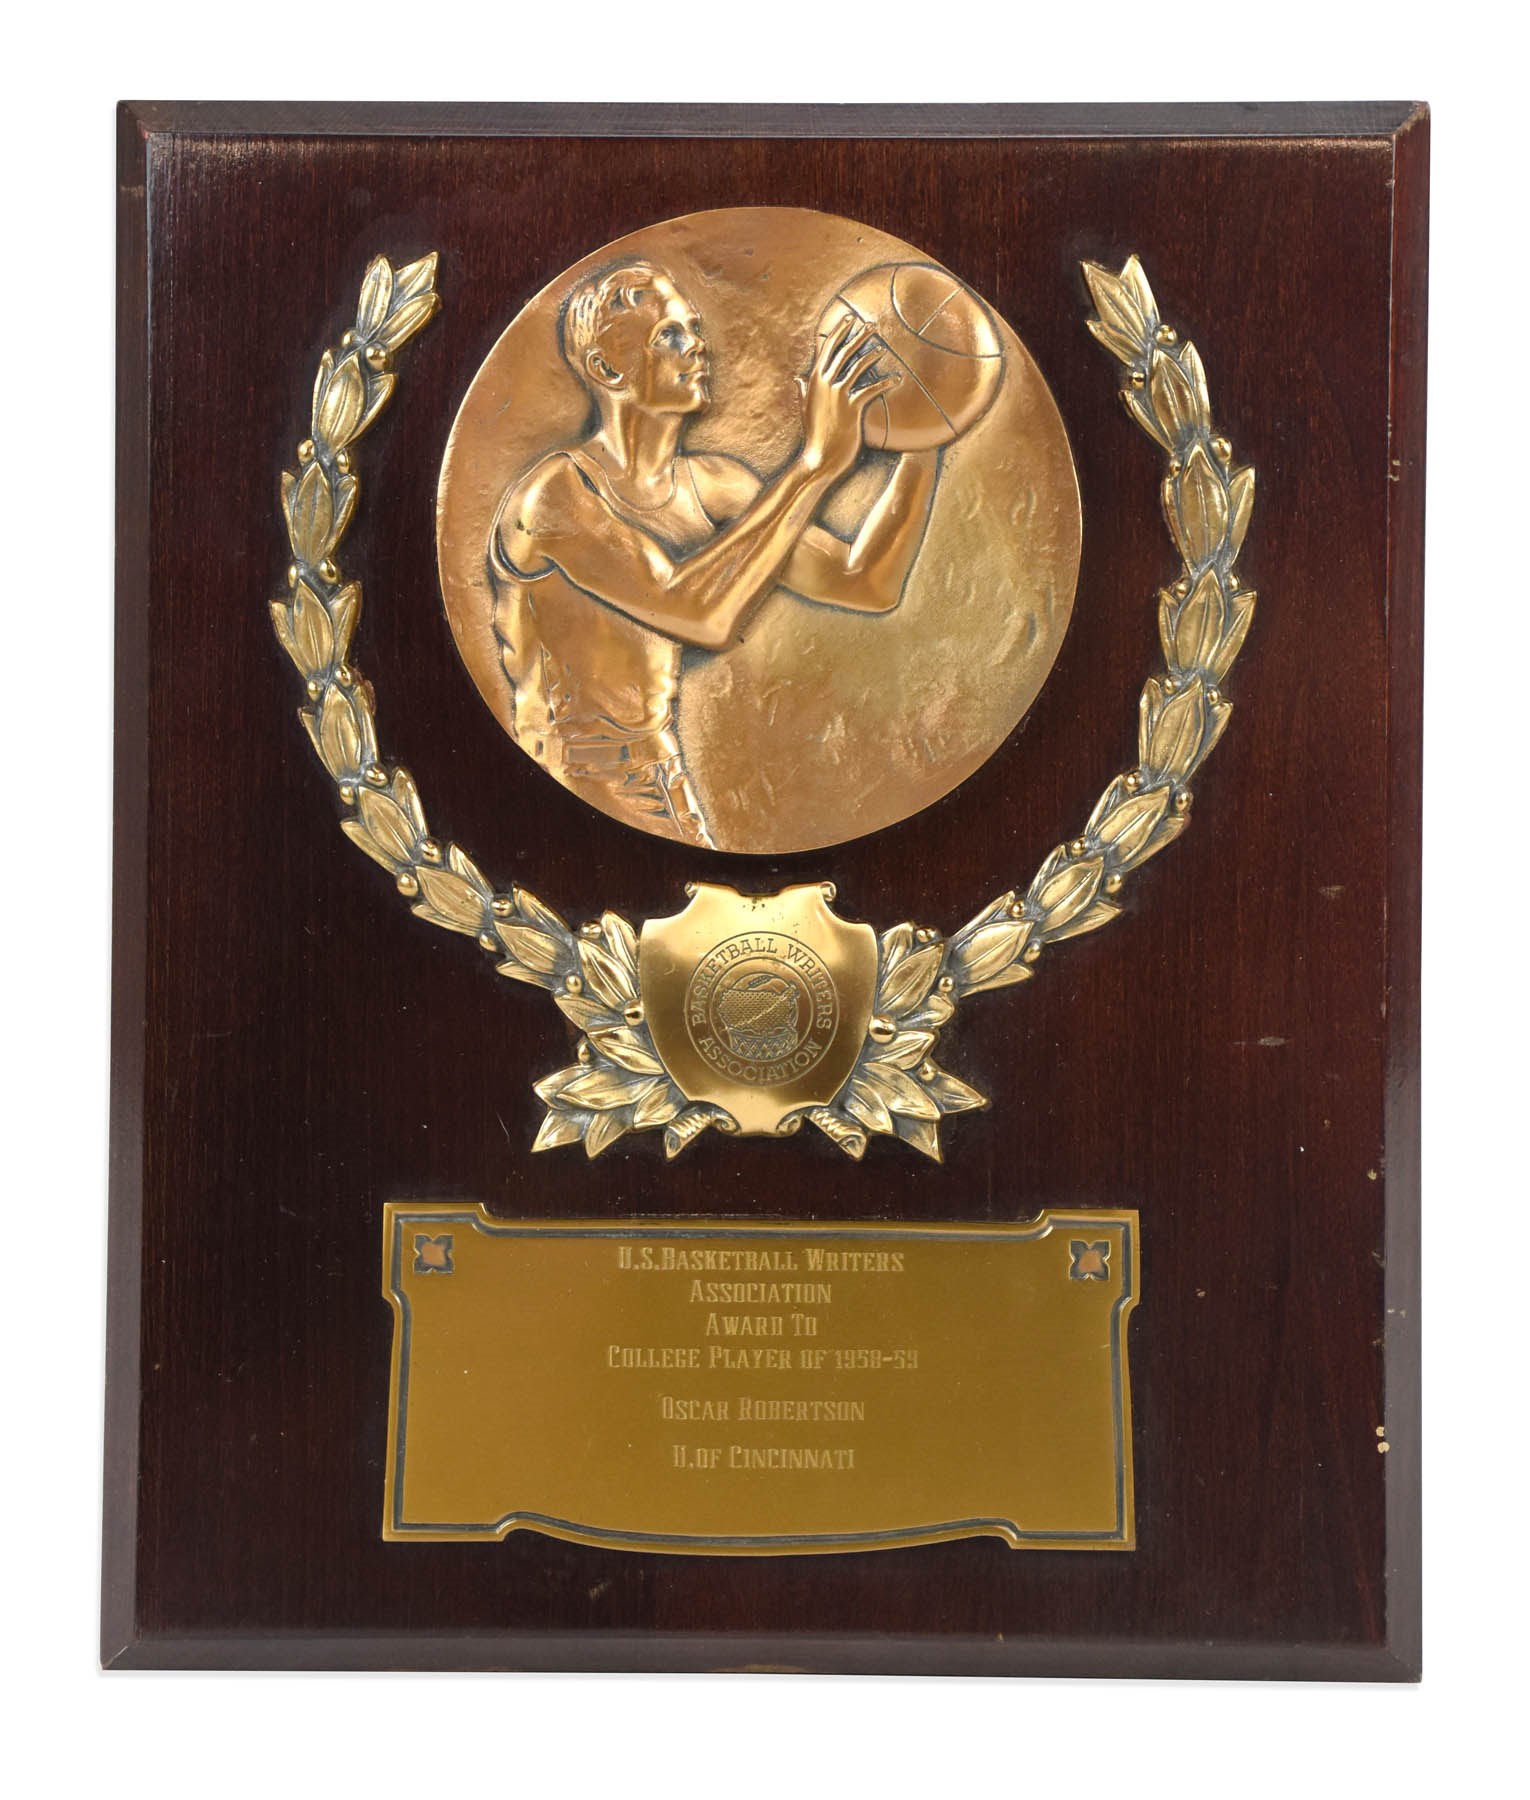 - 1958-59 Oscar Robertson College Player of the Year Award - First Ever!